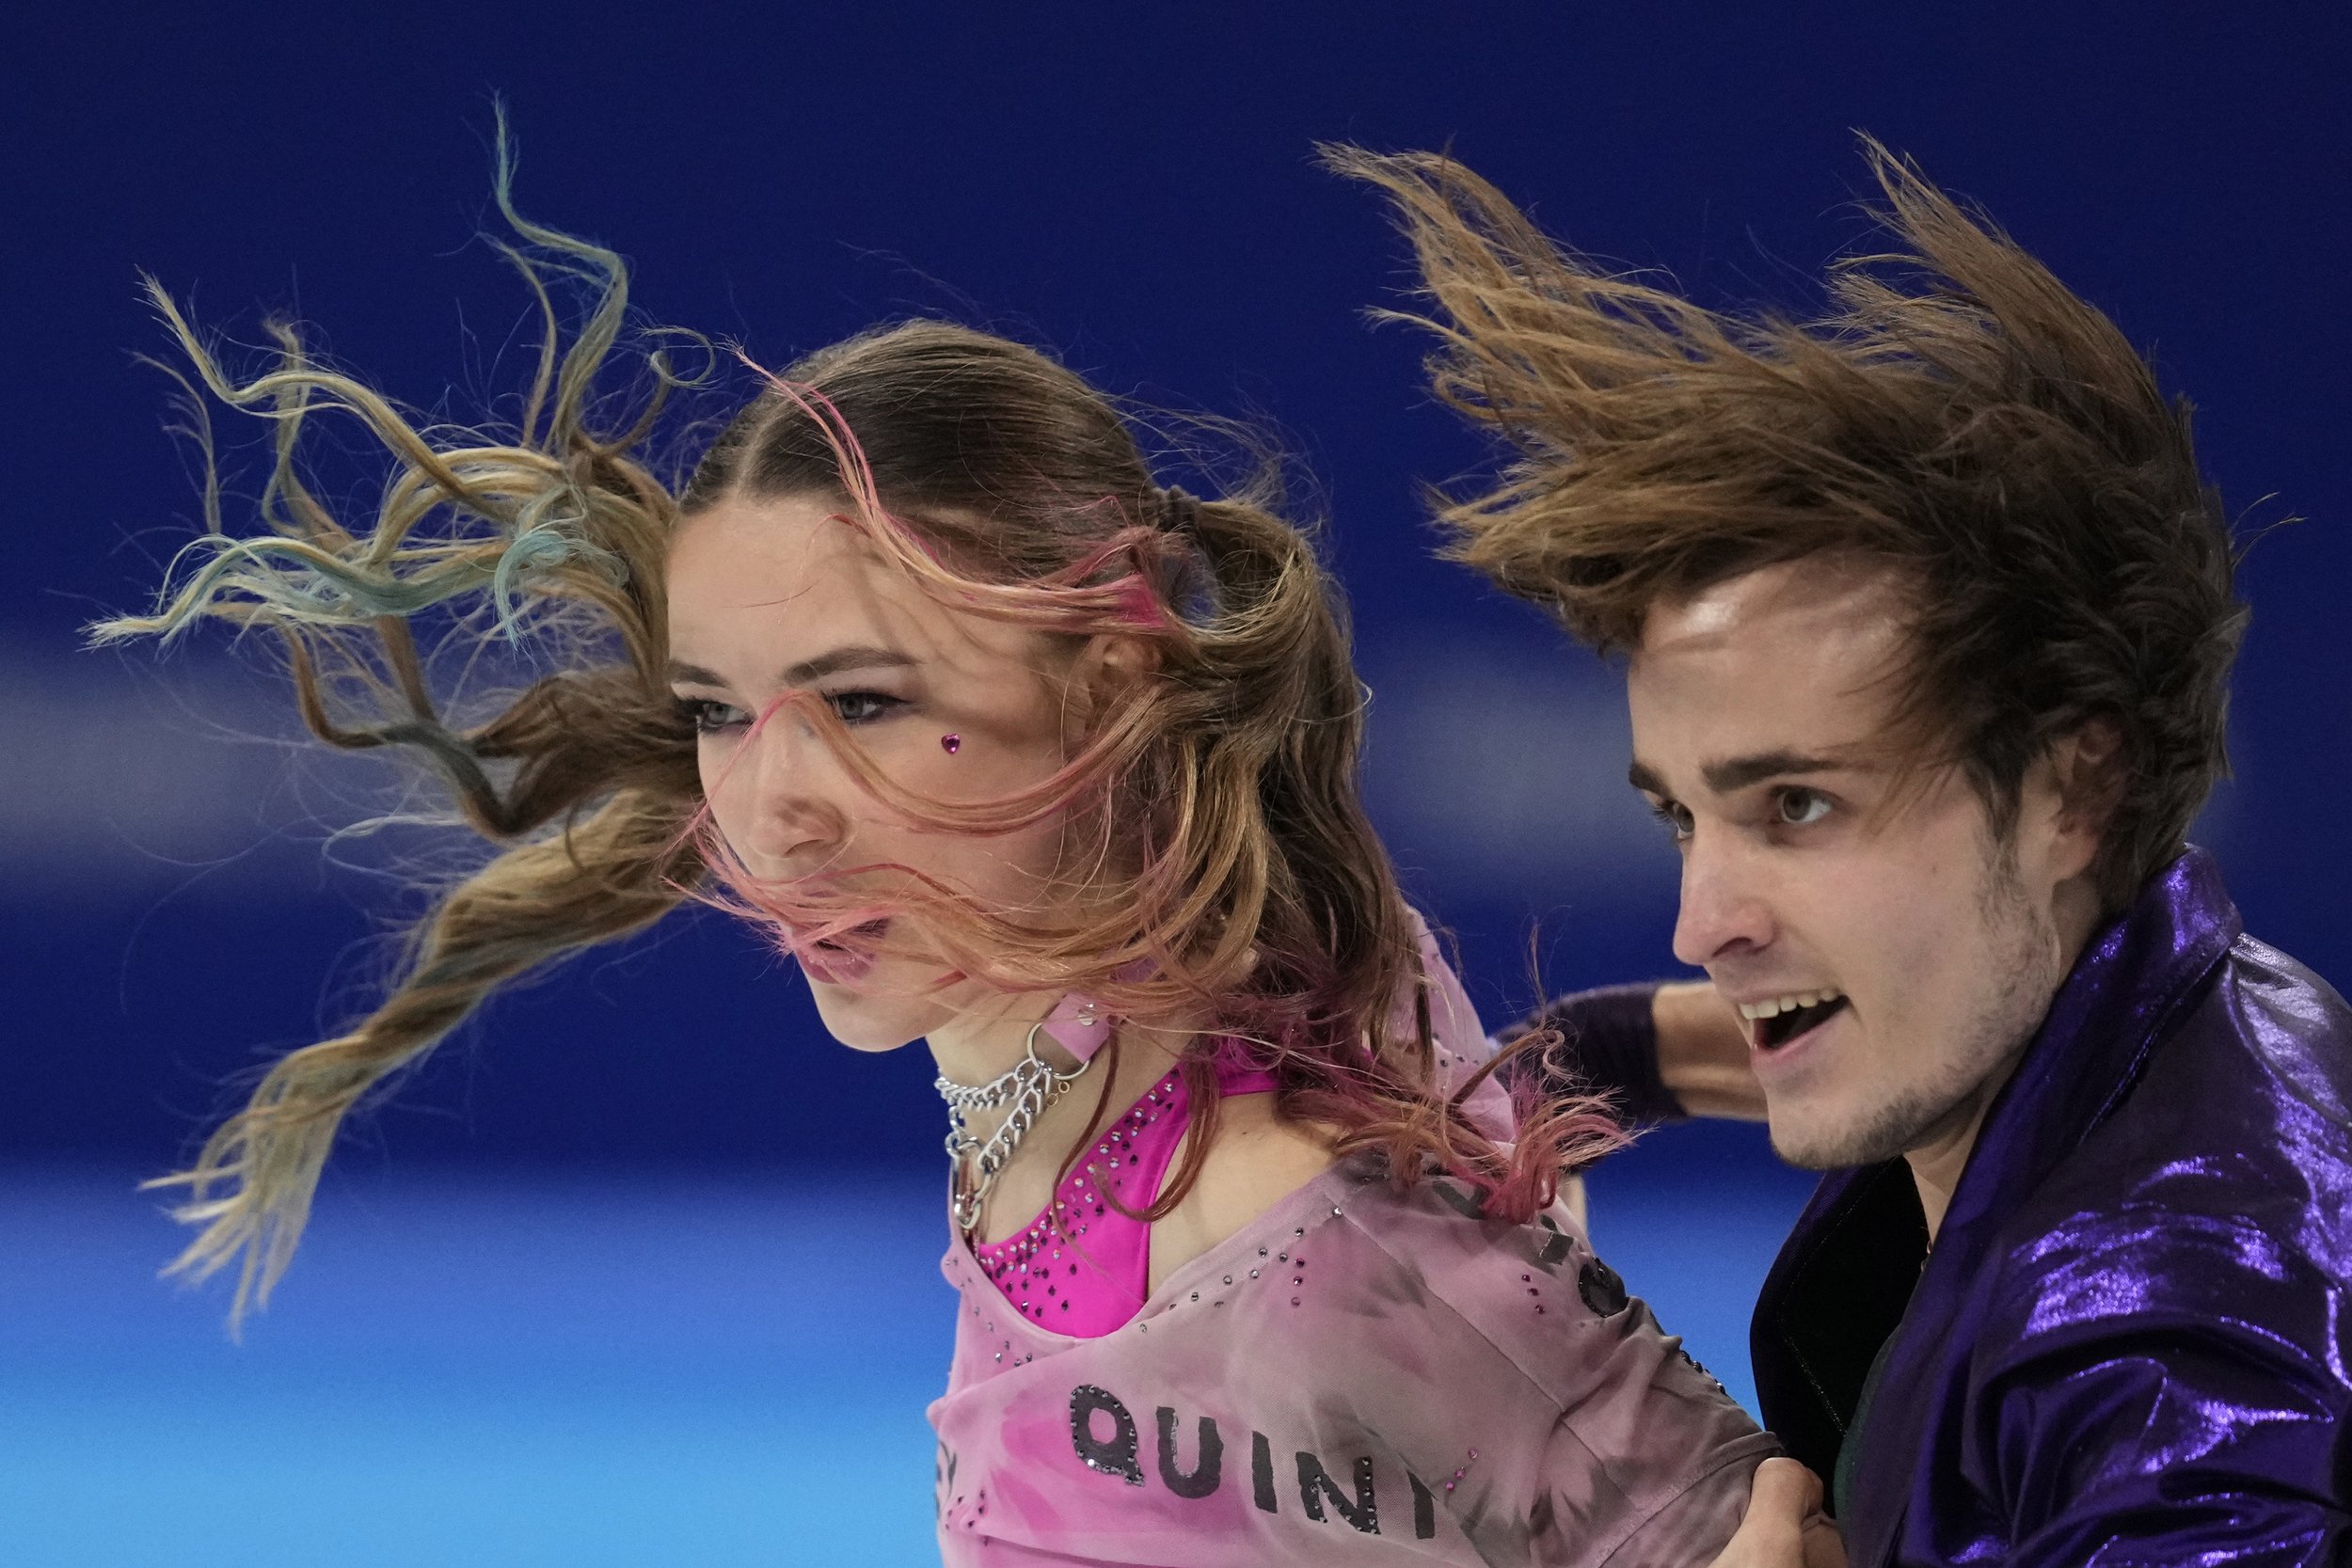  Katharina Mueller and Tim Dieck, of Germany, perform their routine in the ice dance competition during figure skating at the 2022 Winter Olympics, Saturday, Feb. 12, 2022, in Beijing. (AP Photo/Natacha Pisarenko) 